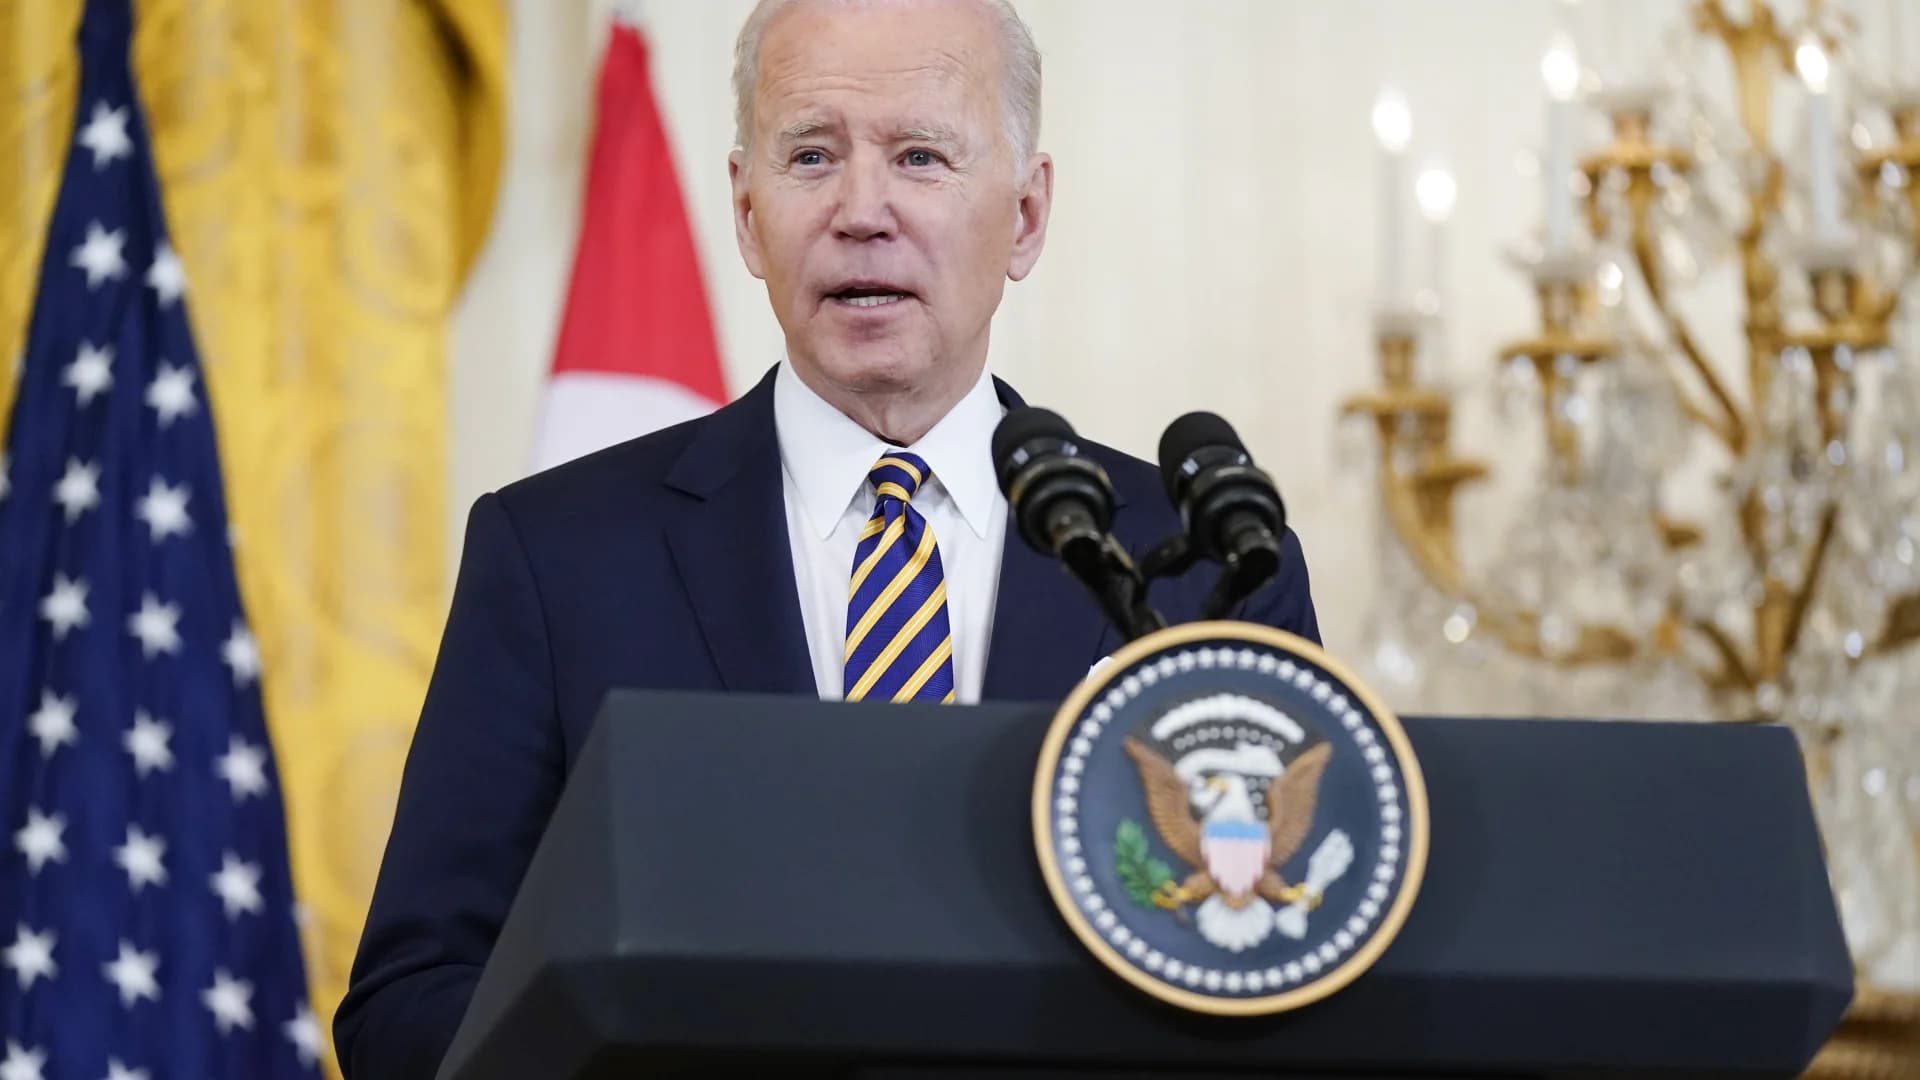 President Biden says he's considering a gasoline tax holiday